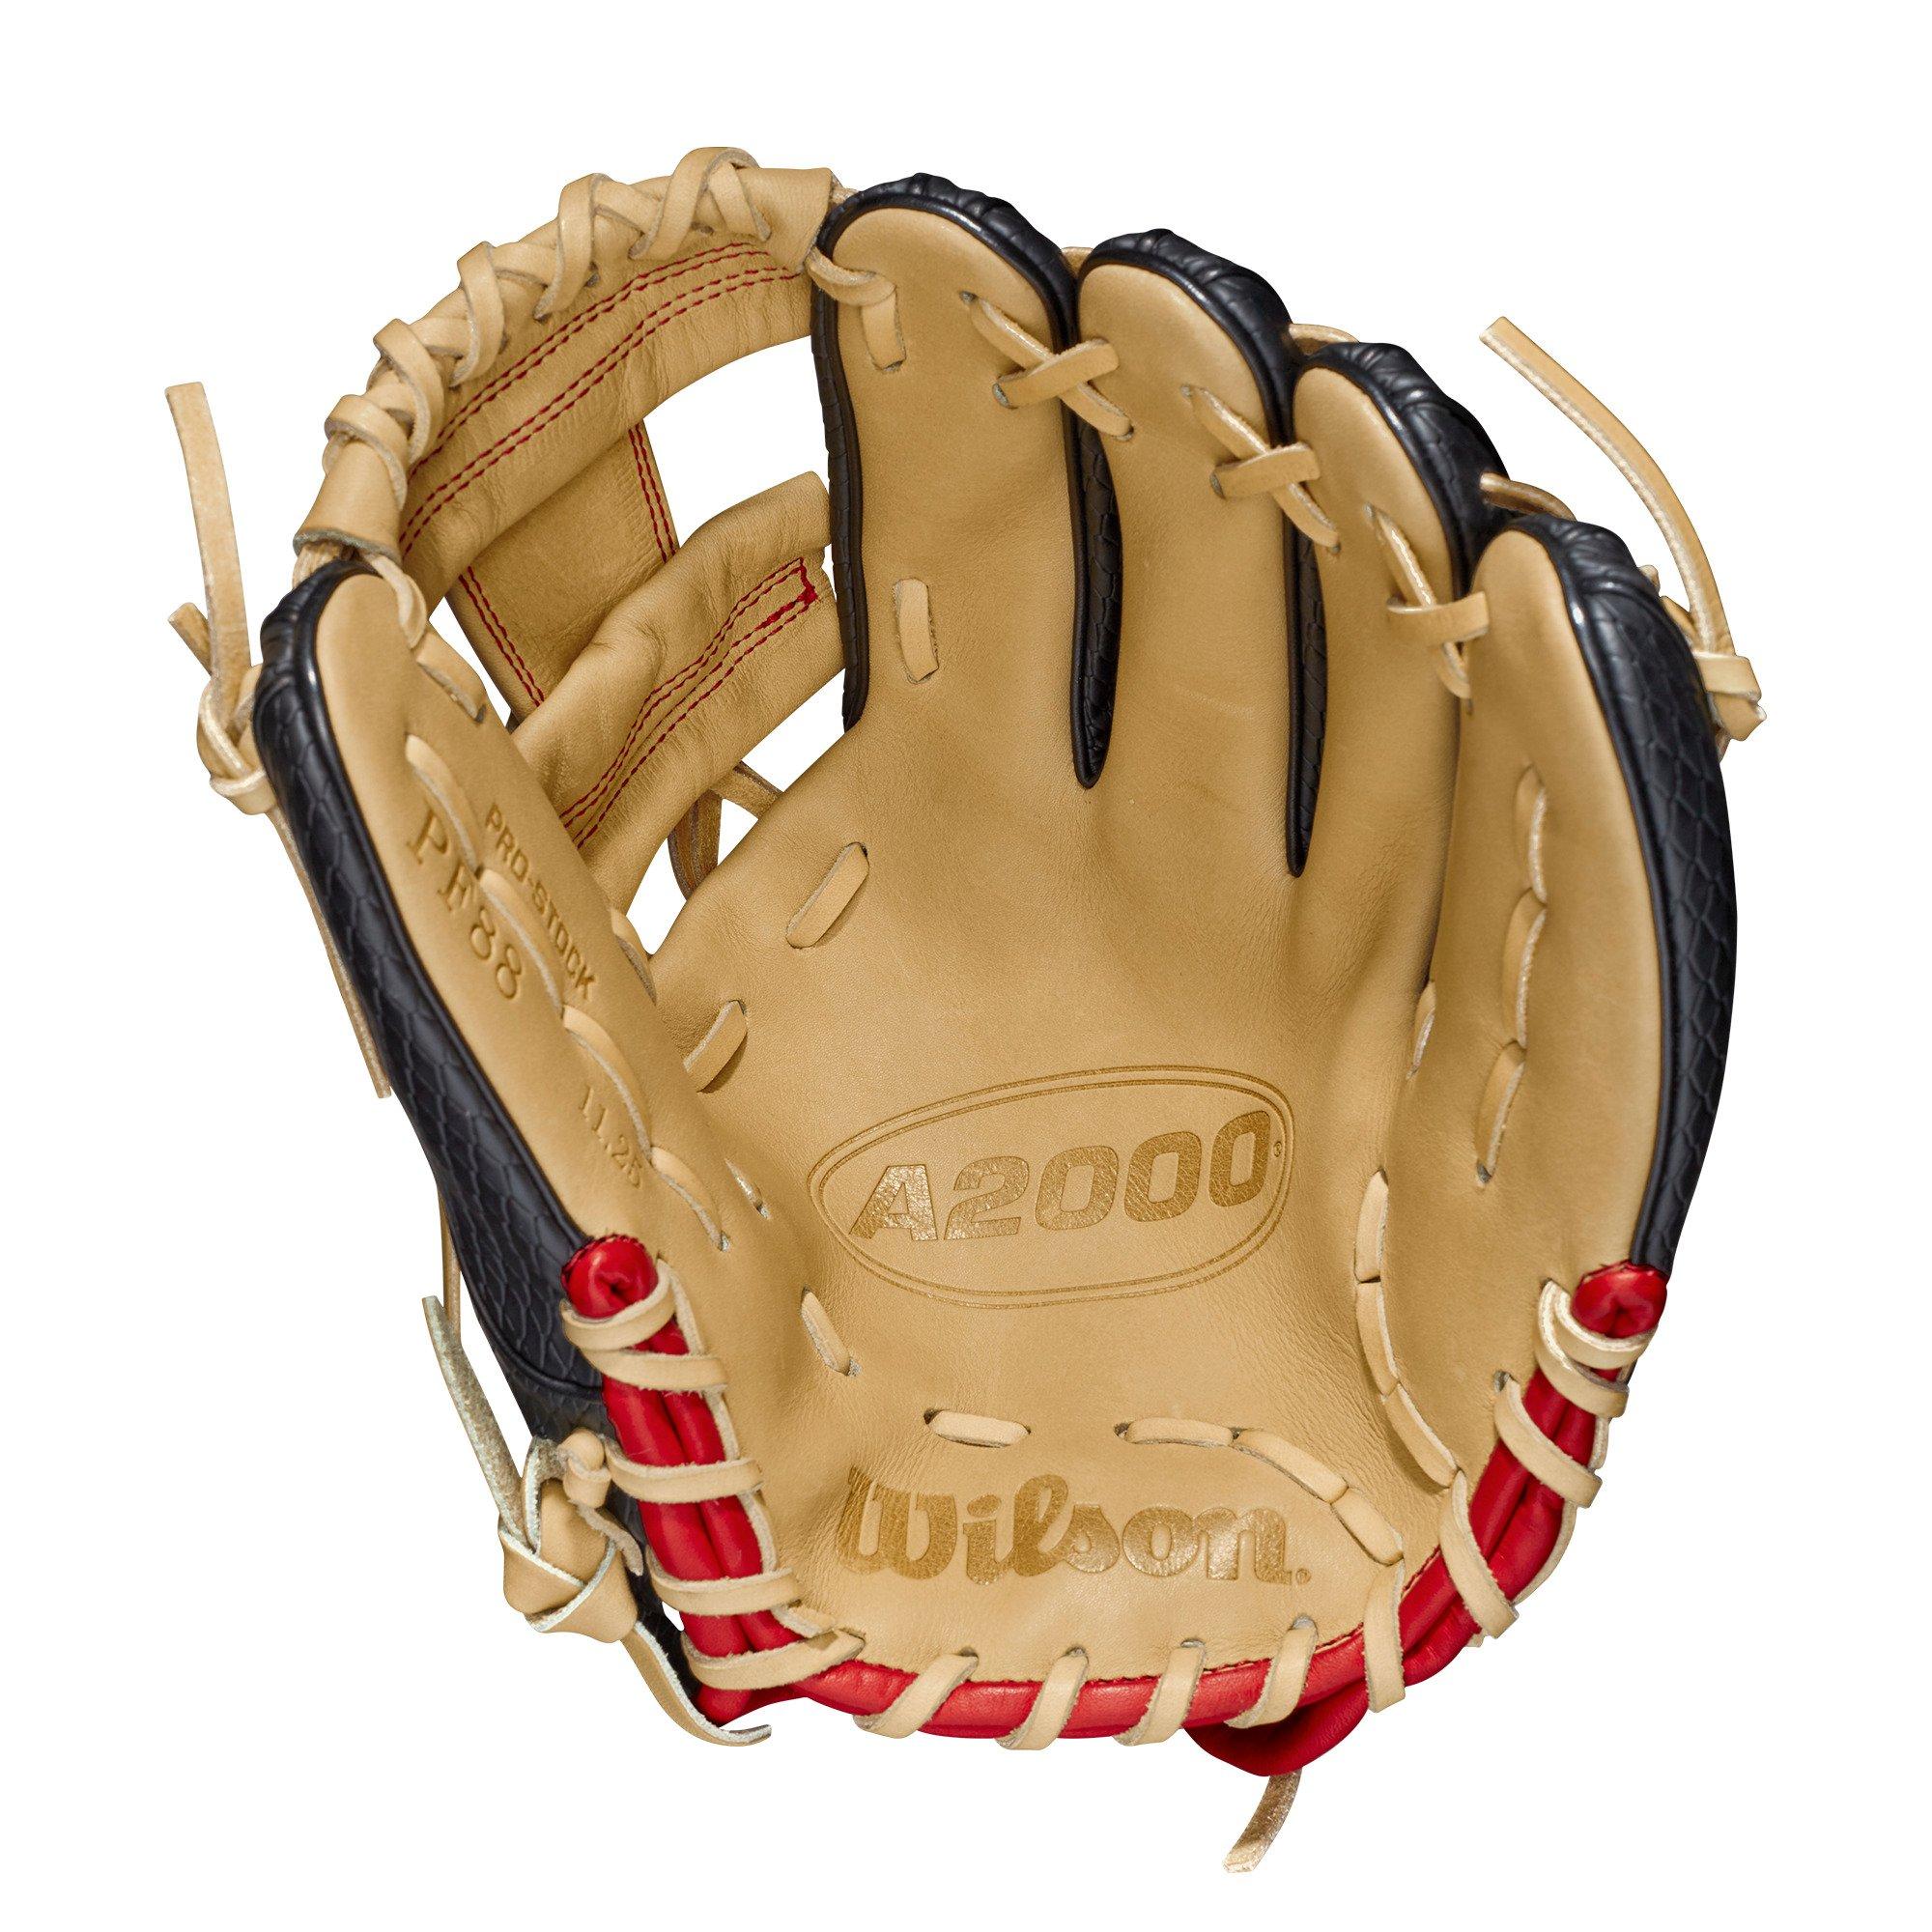 Details about   New Wilson A1K Series Pedroia Fit Baseball Glove 11.25 inch RHT NWT 